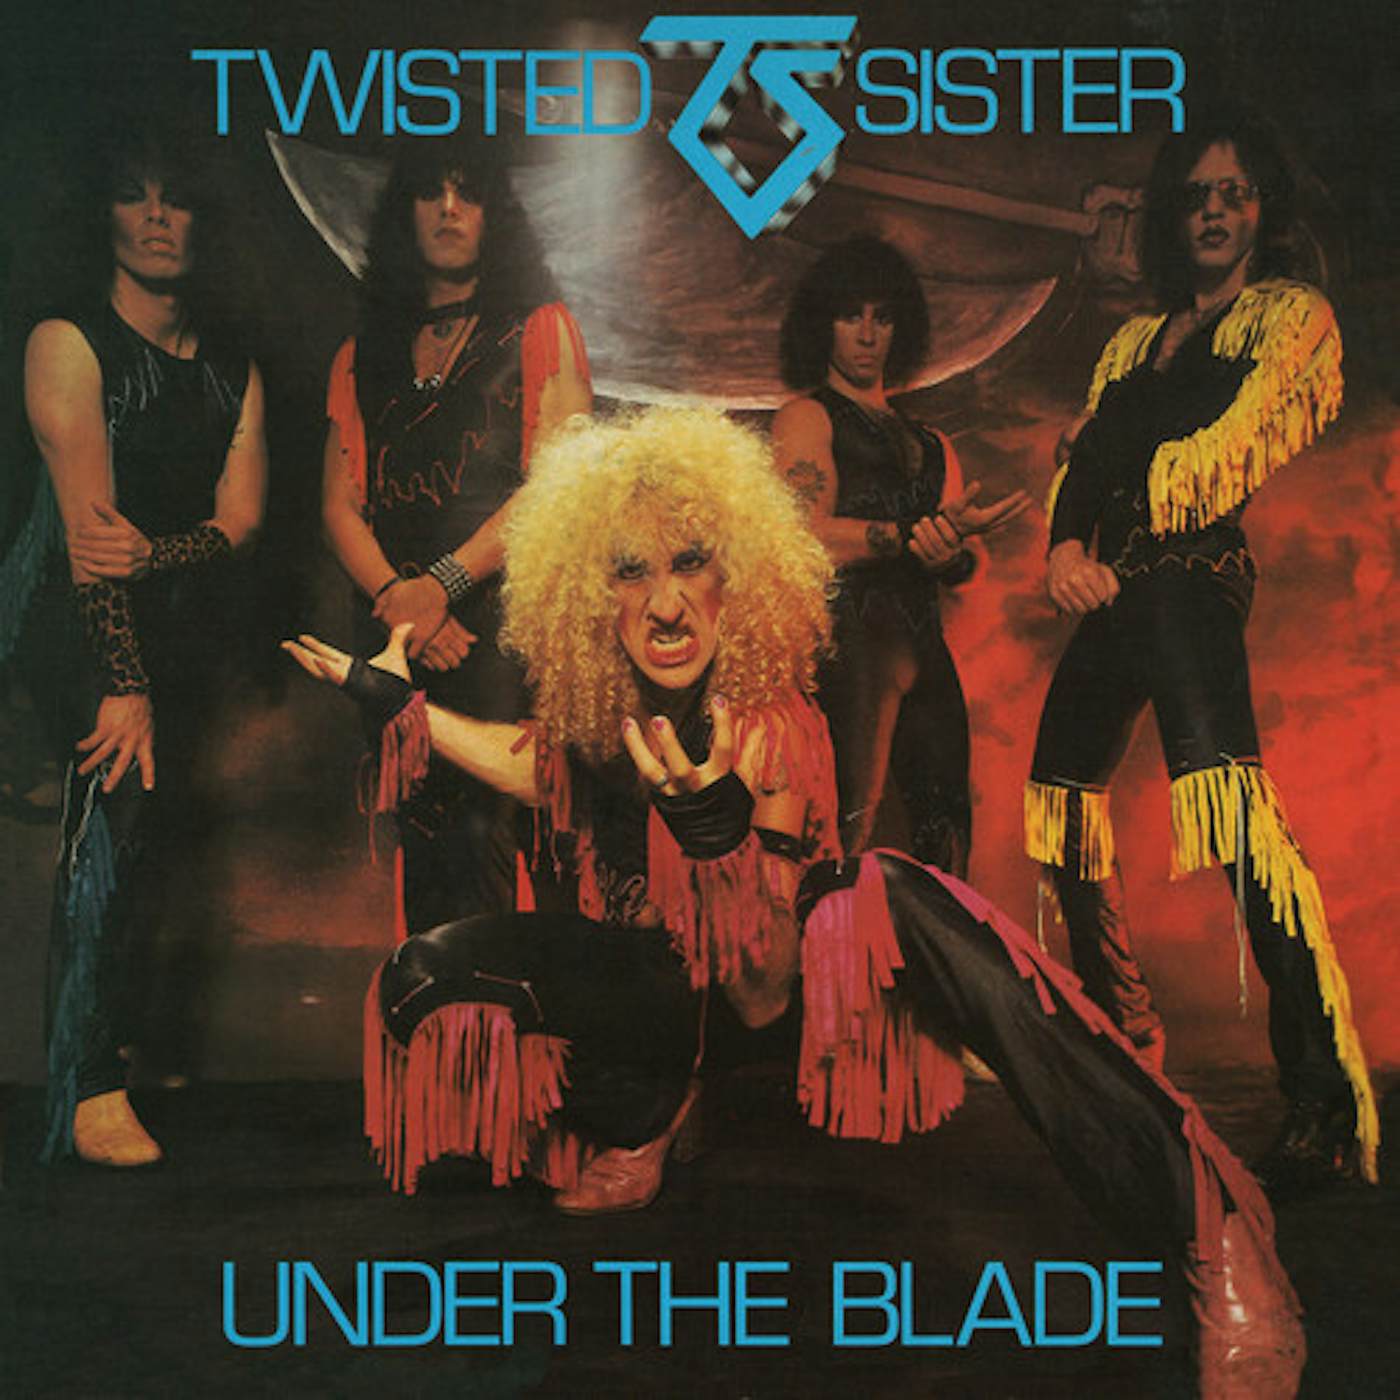 Twisted Sister Under The Blade (Colored/Deluxe) Vinyl Record